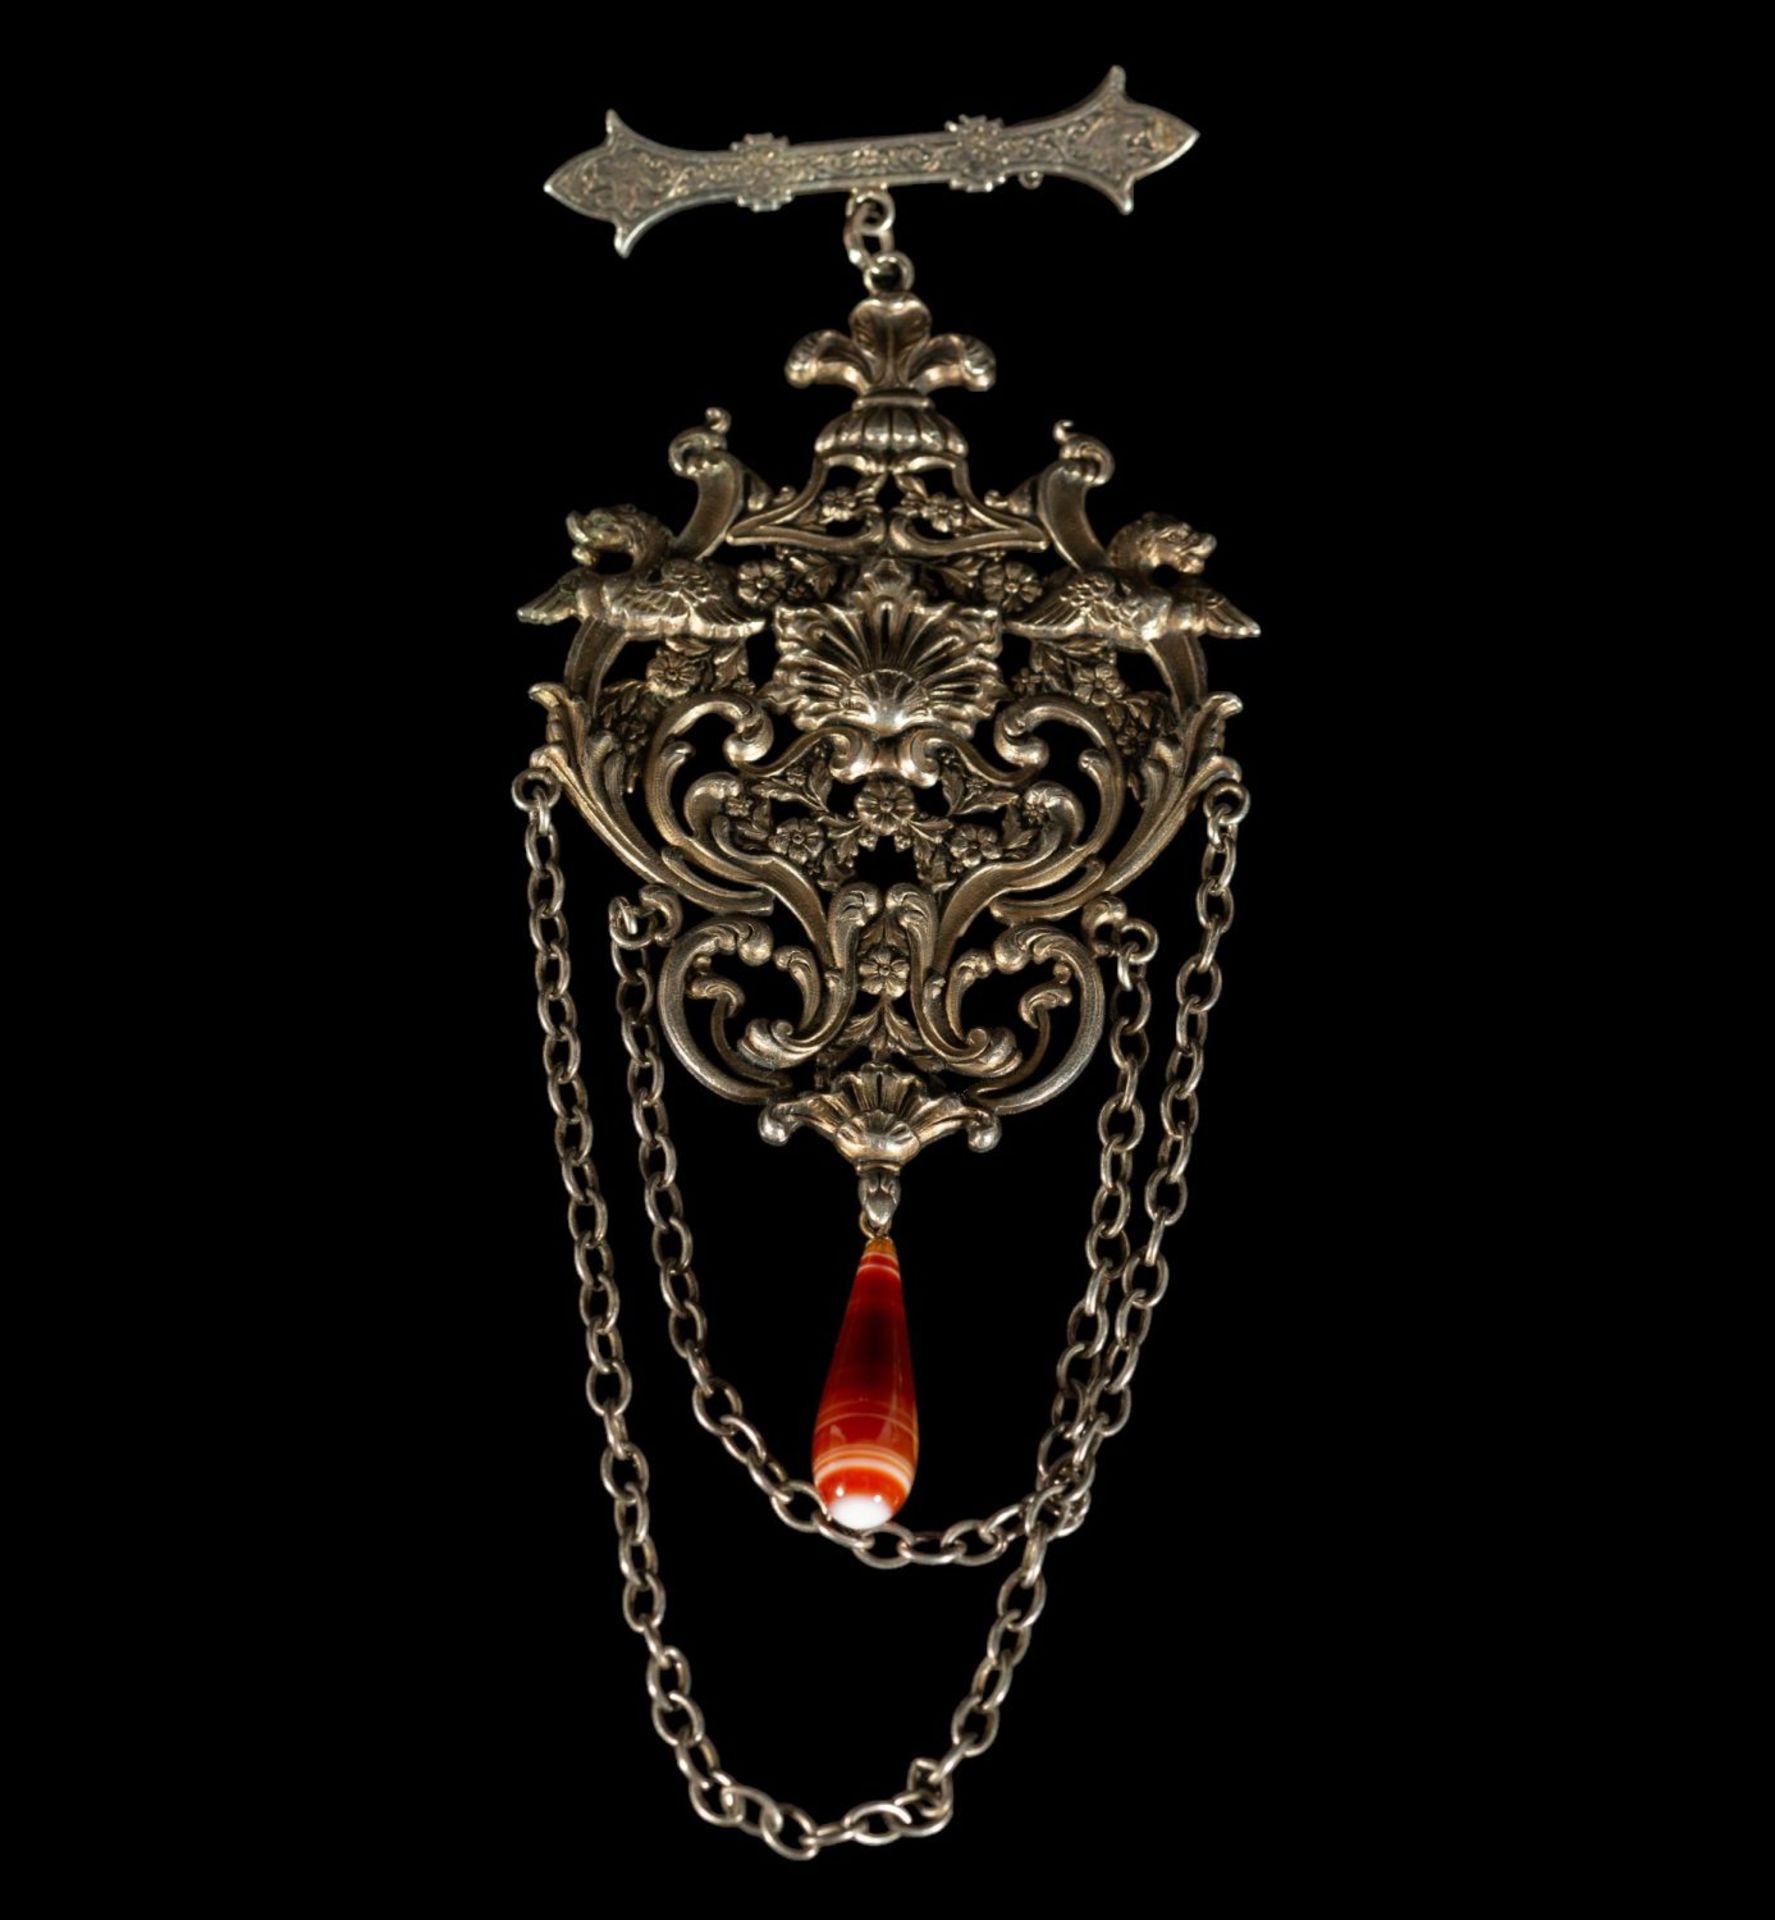 Elegant Large "Chatelain" type pectoral pendant in English Sterling silver for a Victorian gentleman